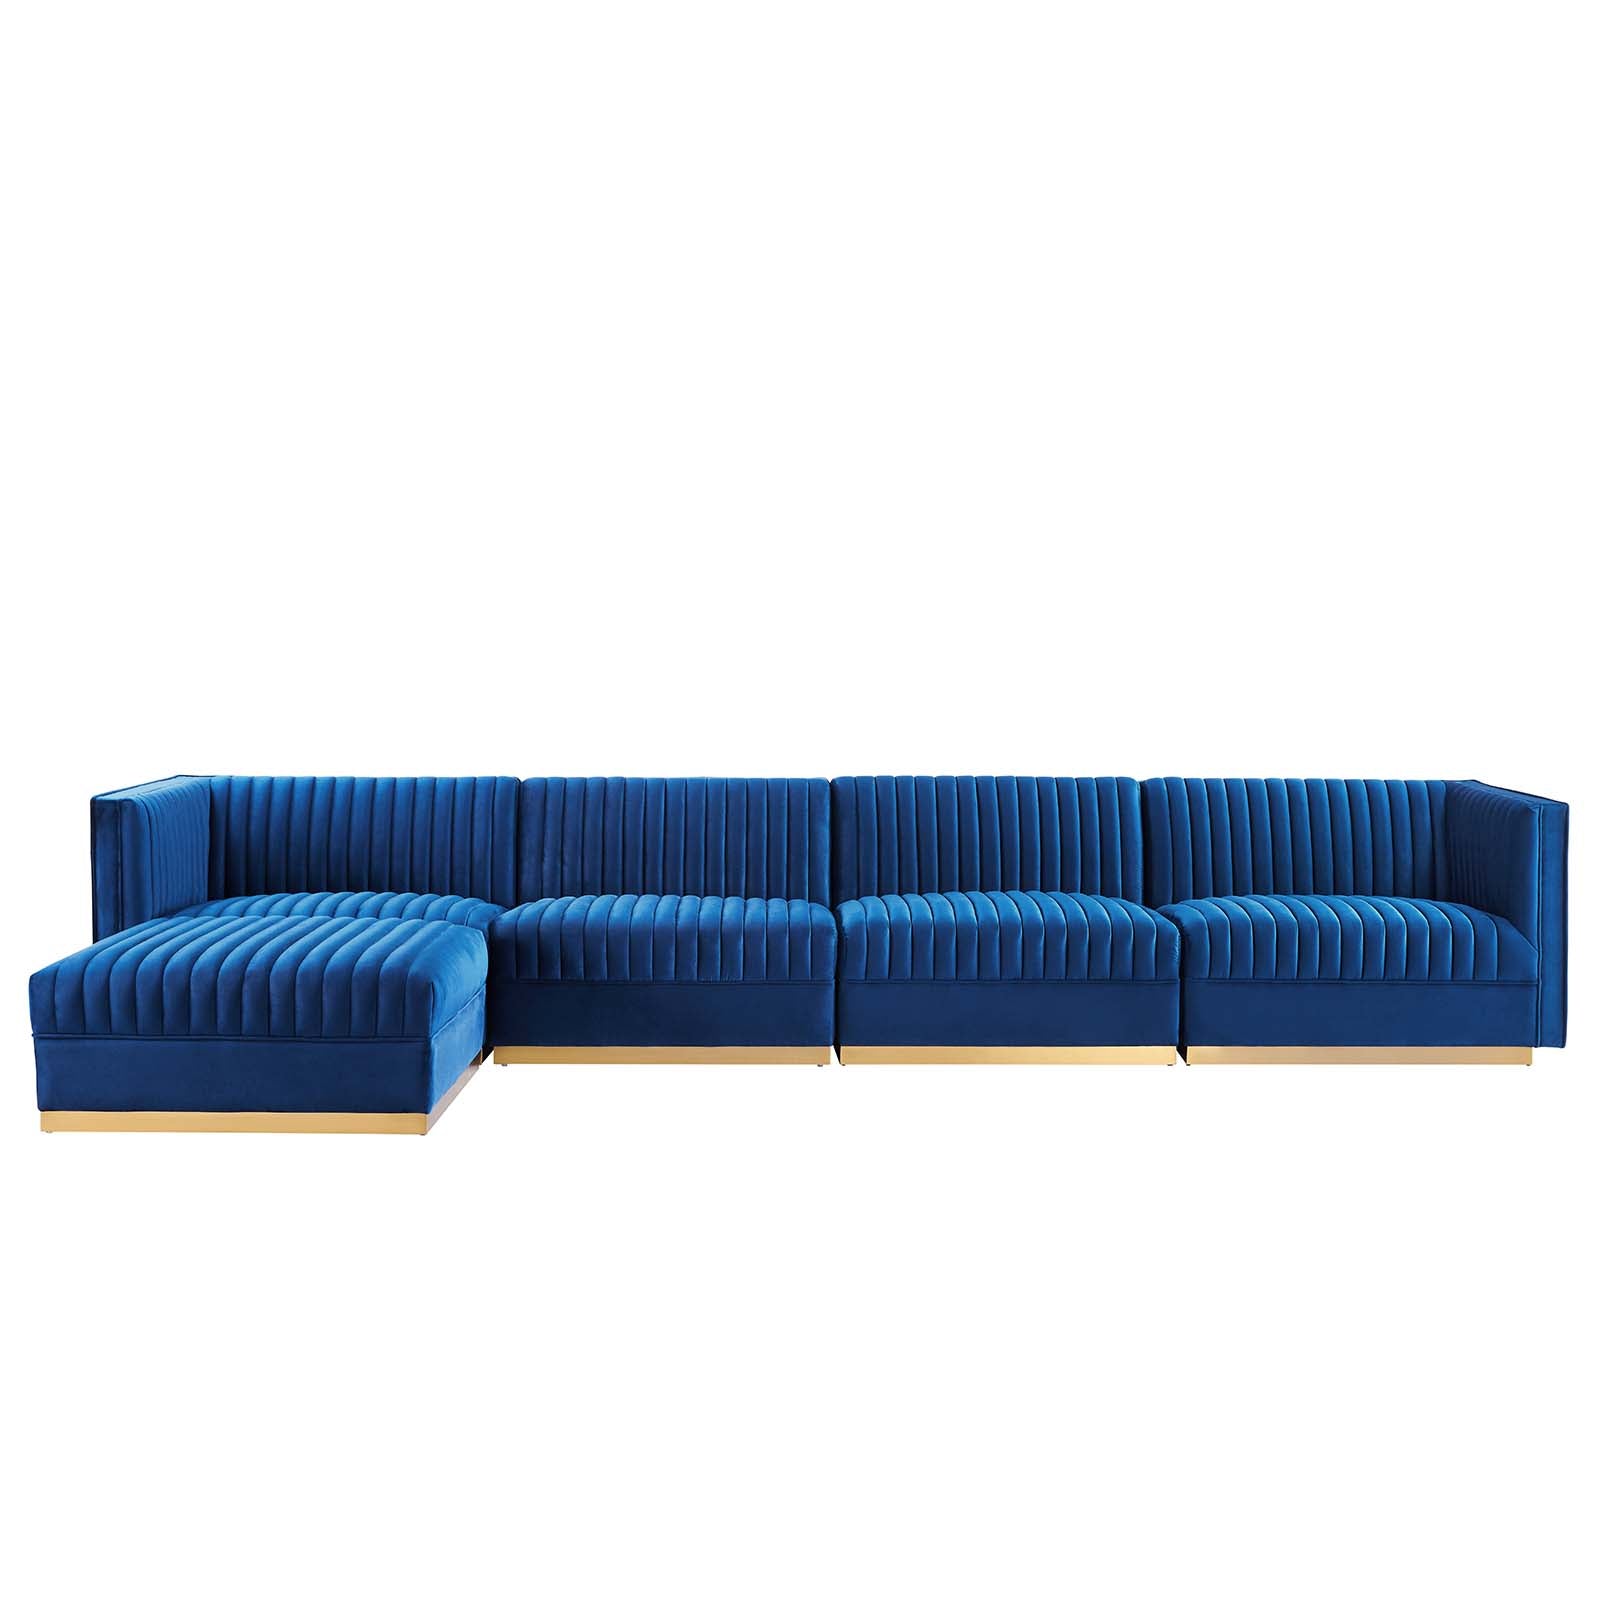 Modway Sectional Sofas - Sanguine Channel Tufted Performance Velvet 5 Piece Modular Sectional Sofa Navy